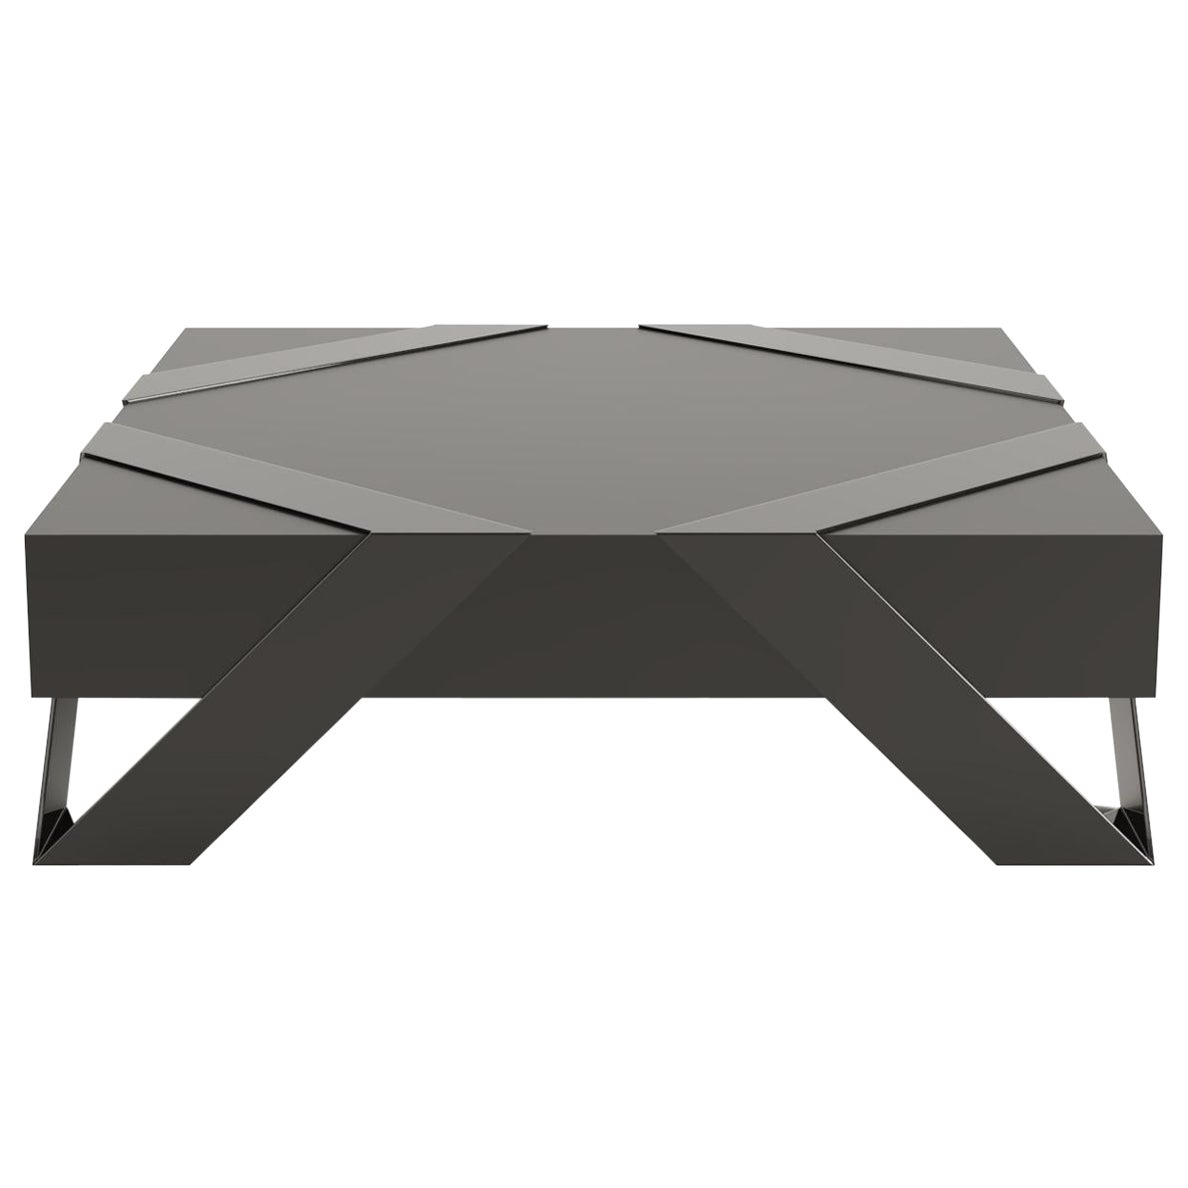 21st Century Modern Center Coffee Table High-Gloss and Matte Black Lacquer